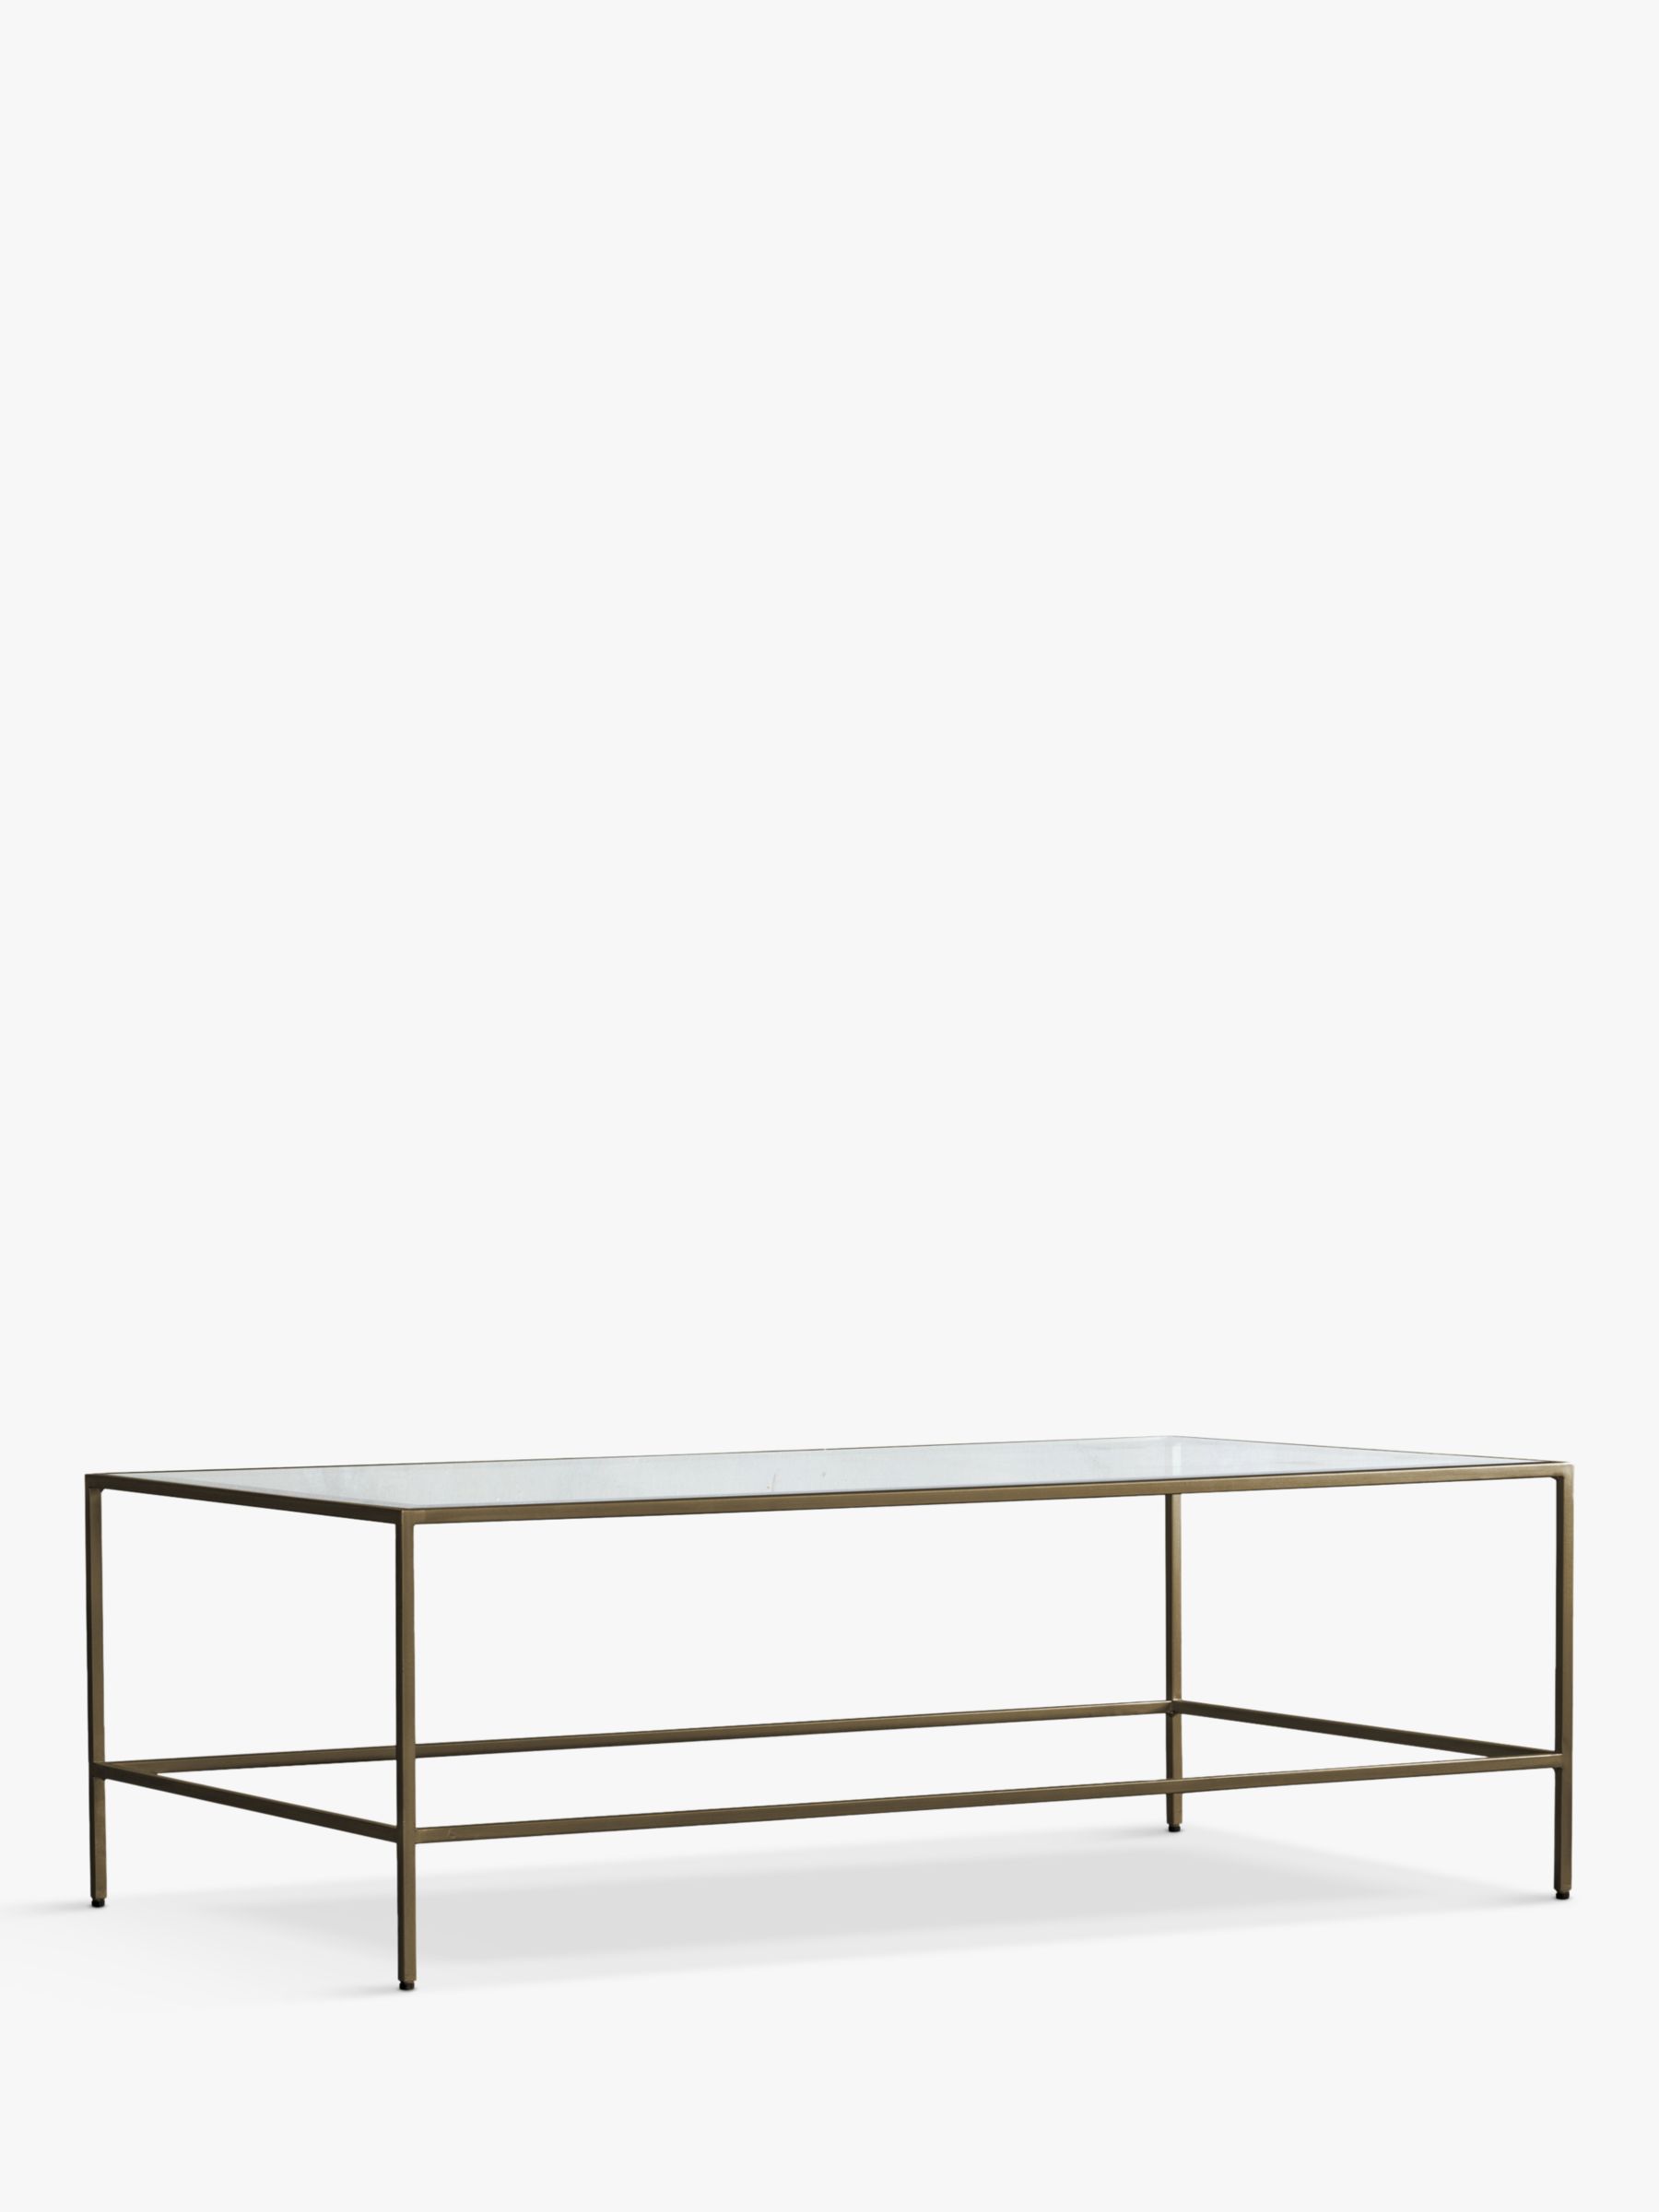 Gallery Direct Outline Glass Coffee Table Bronze At John Lewis Partners